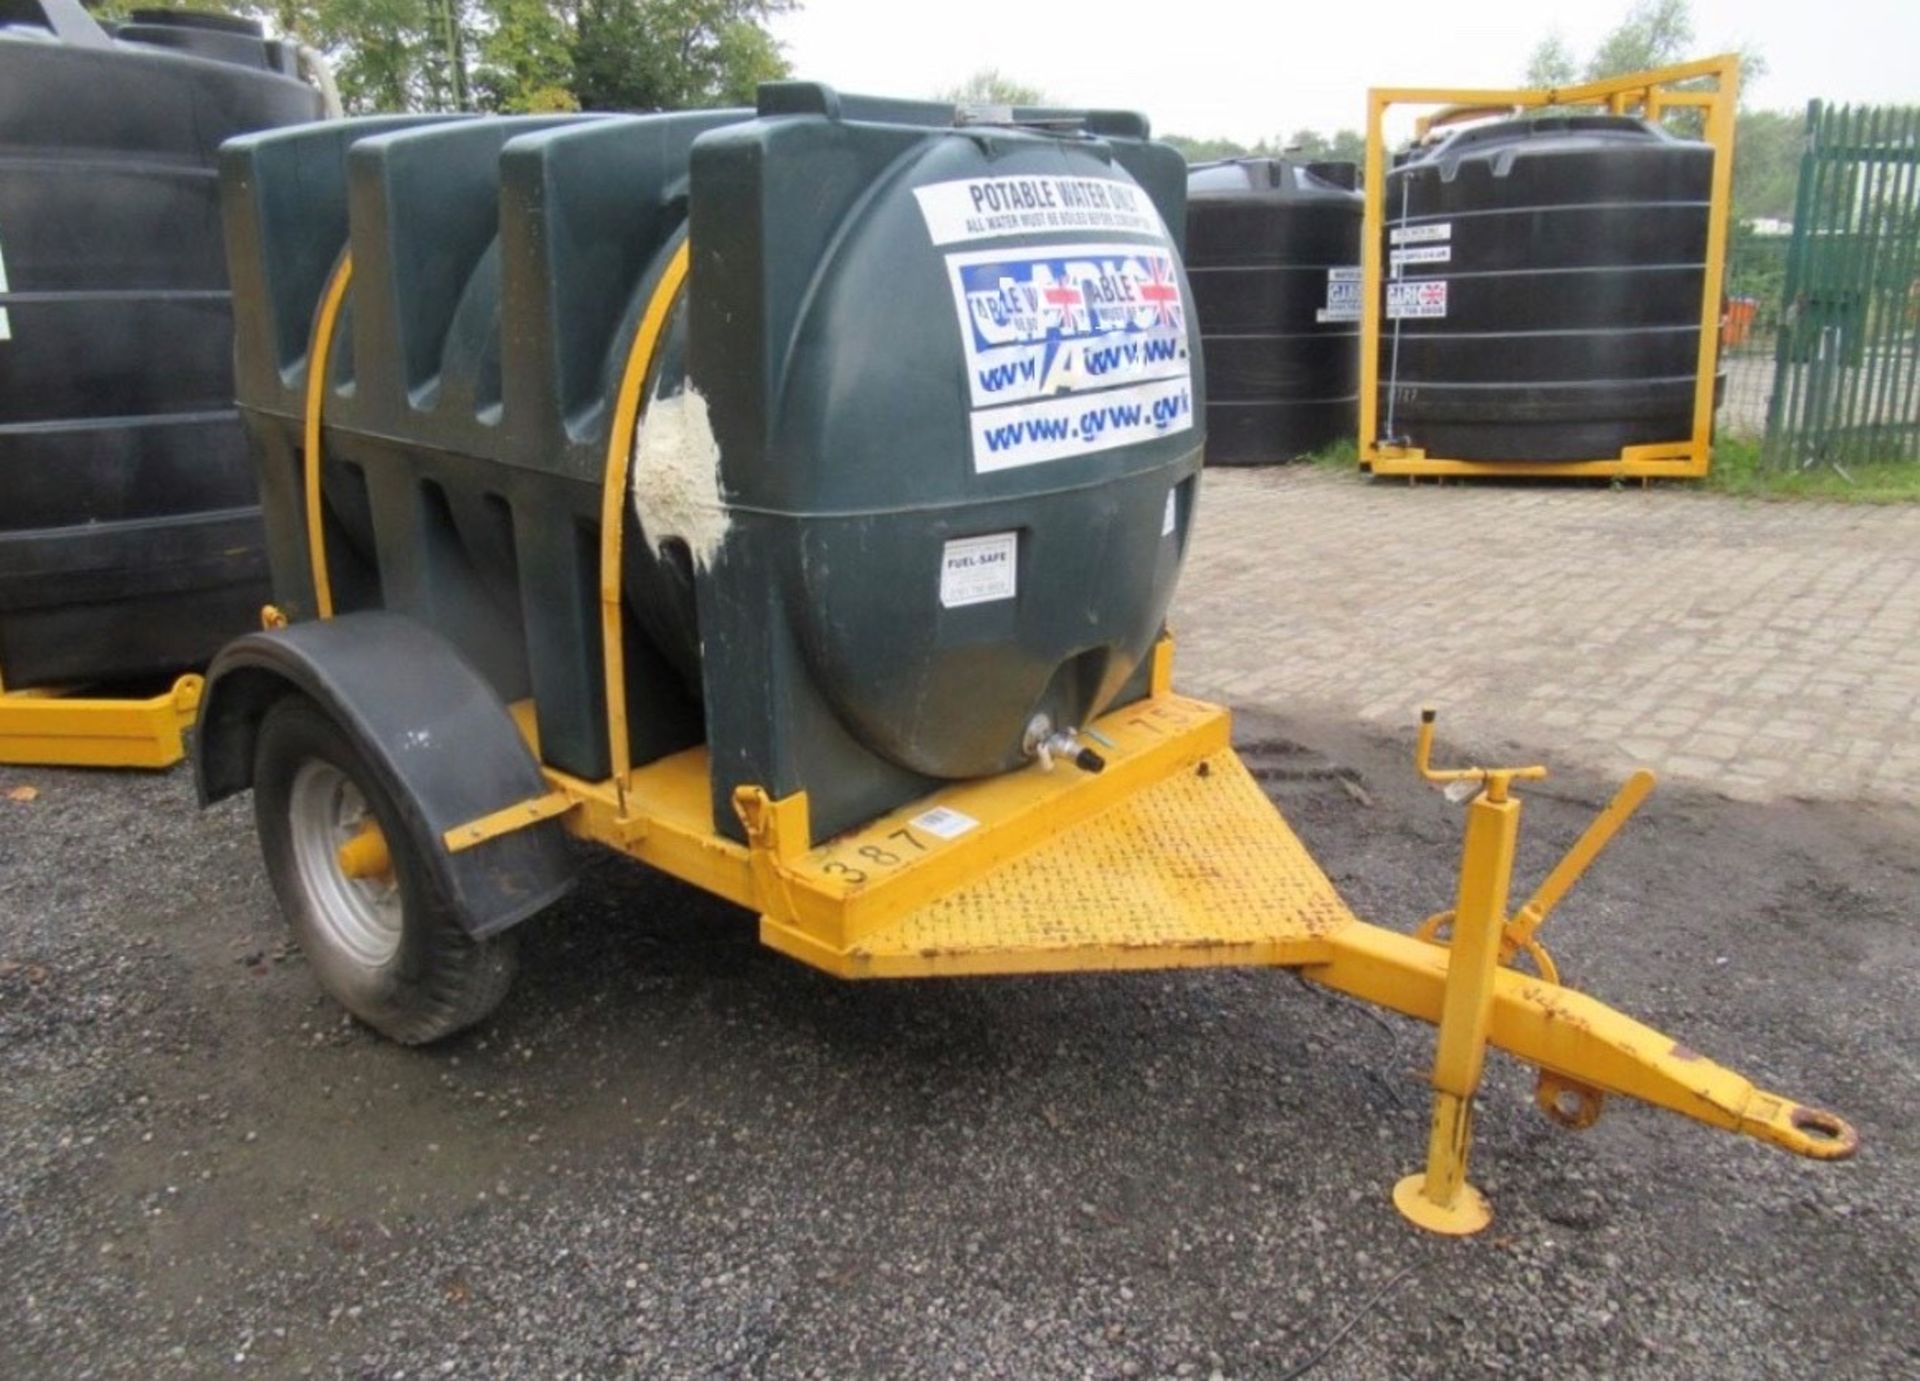 500 Gallon Towable Water Bowser Trailer - Image 2 of 3